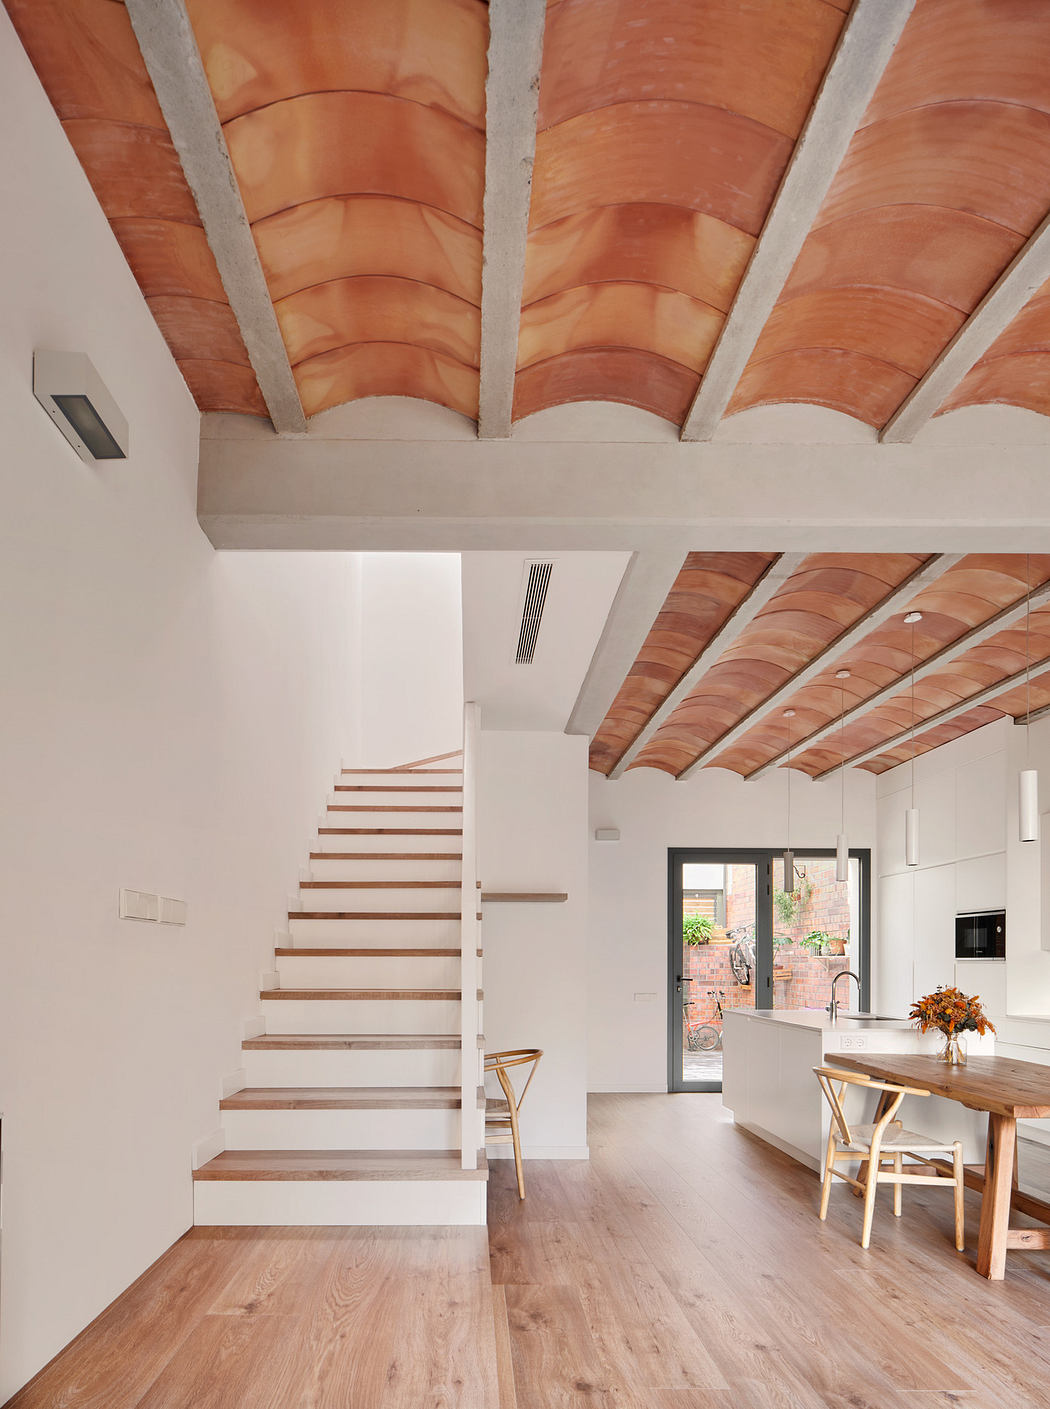 Minimalist interior with wooden stairs and terracotta ceiling vaults.